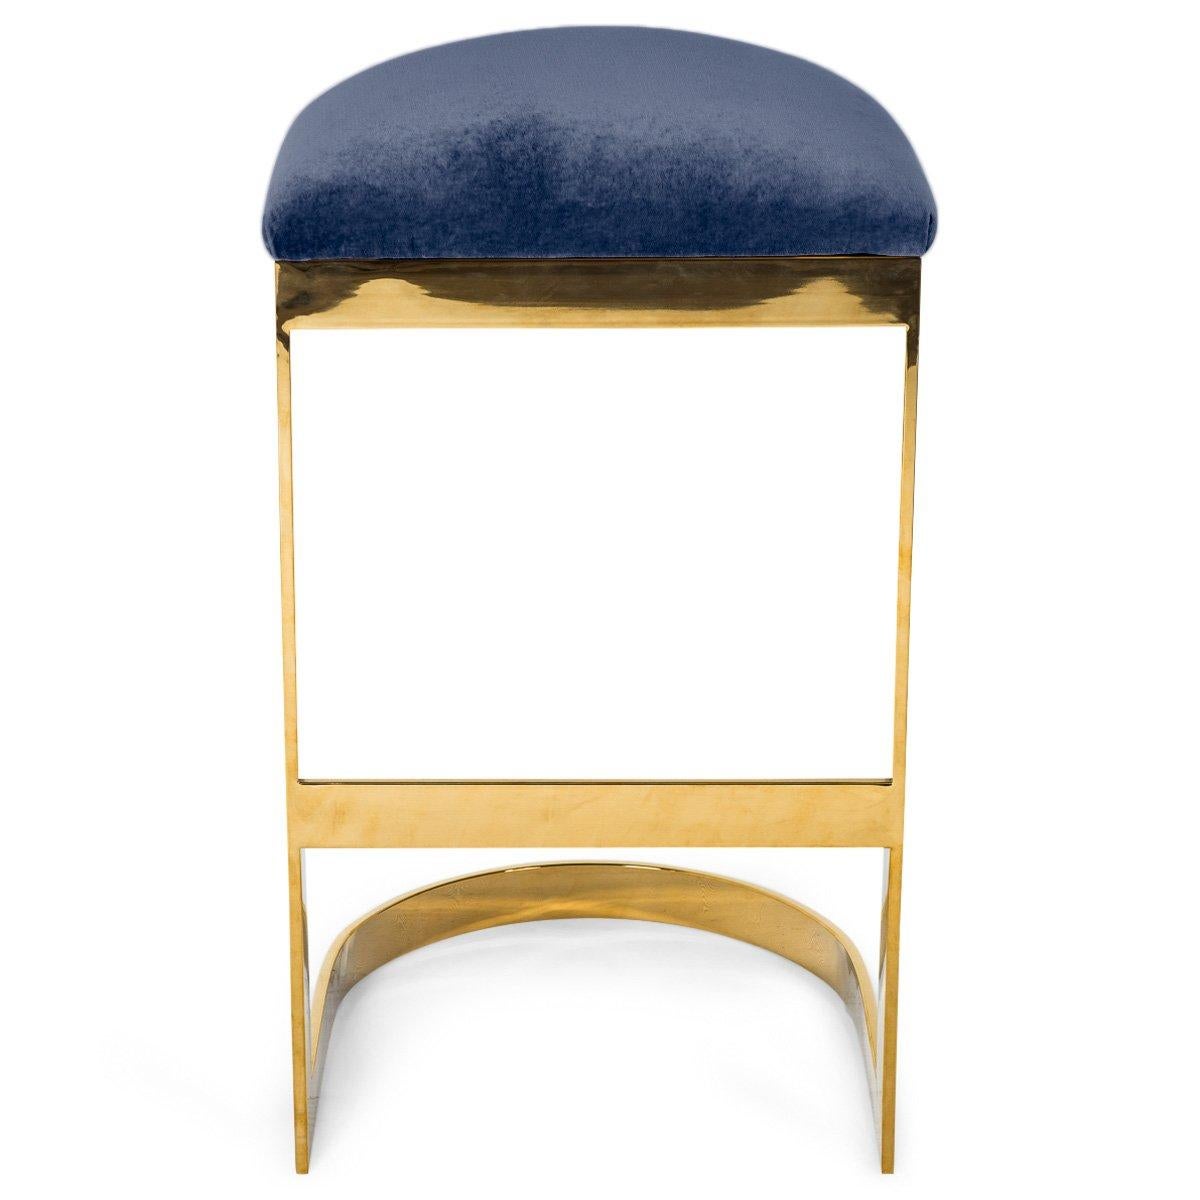 Contemporary Modern Style Backless Bar Stool in Velvet with a Polished Solid Brass Frame For Sale